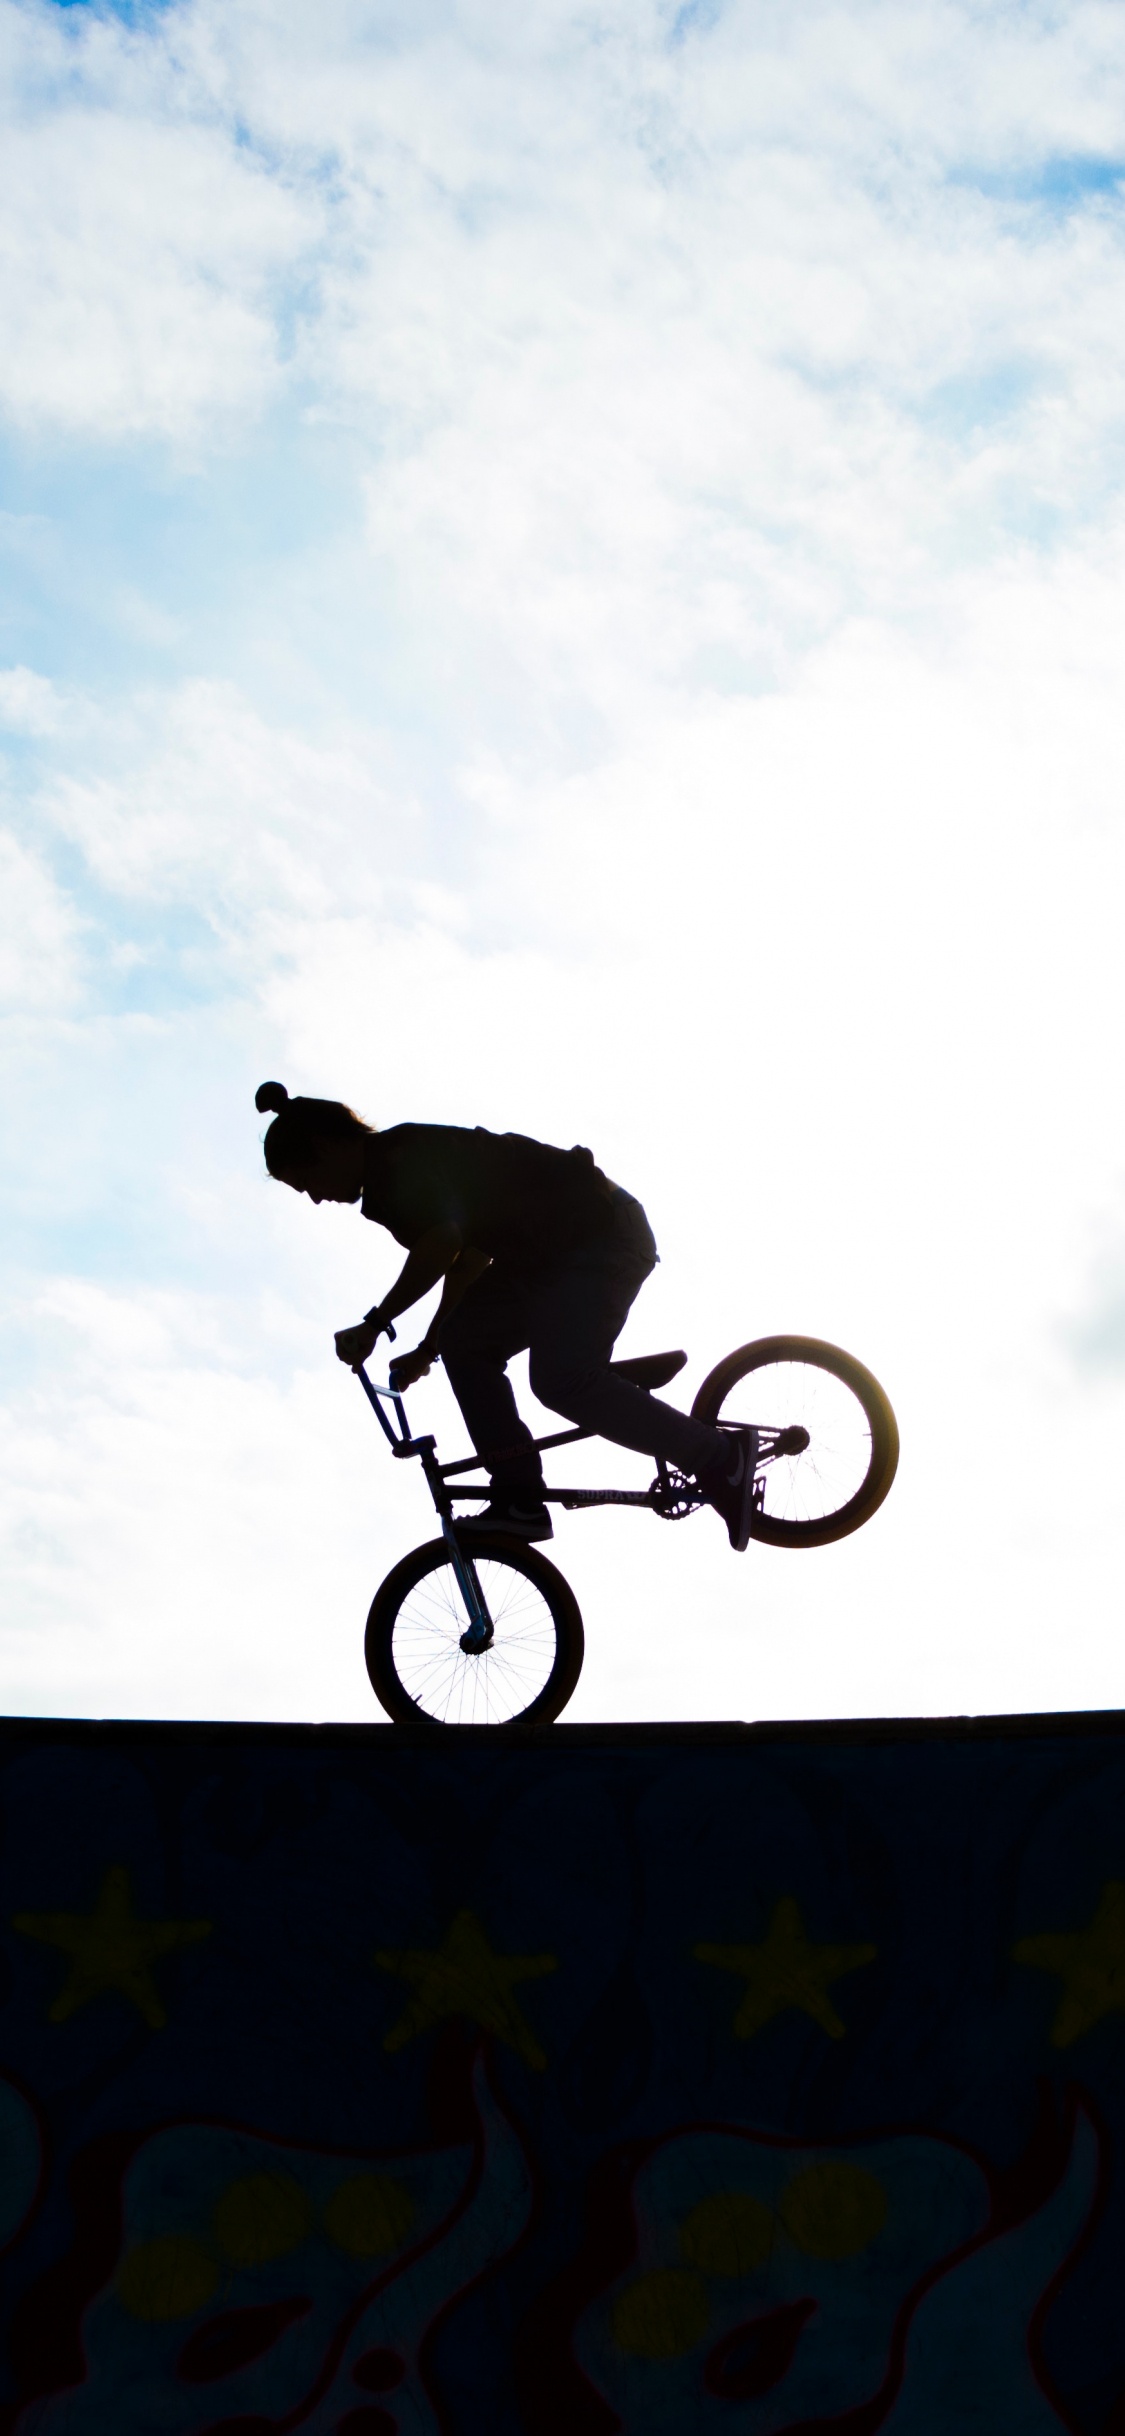 Man Riding Bicycle on Mid Air Under Blue Sky During Daytime. Wallpaper in 1125x2436 Resolution